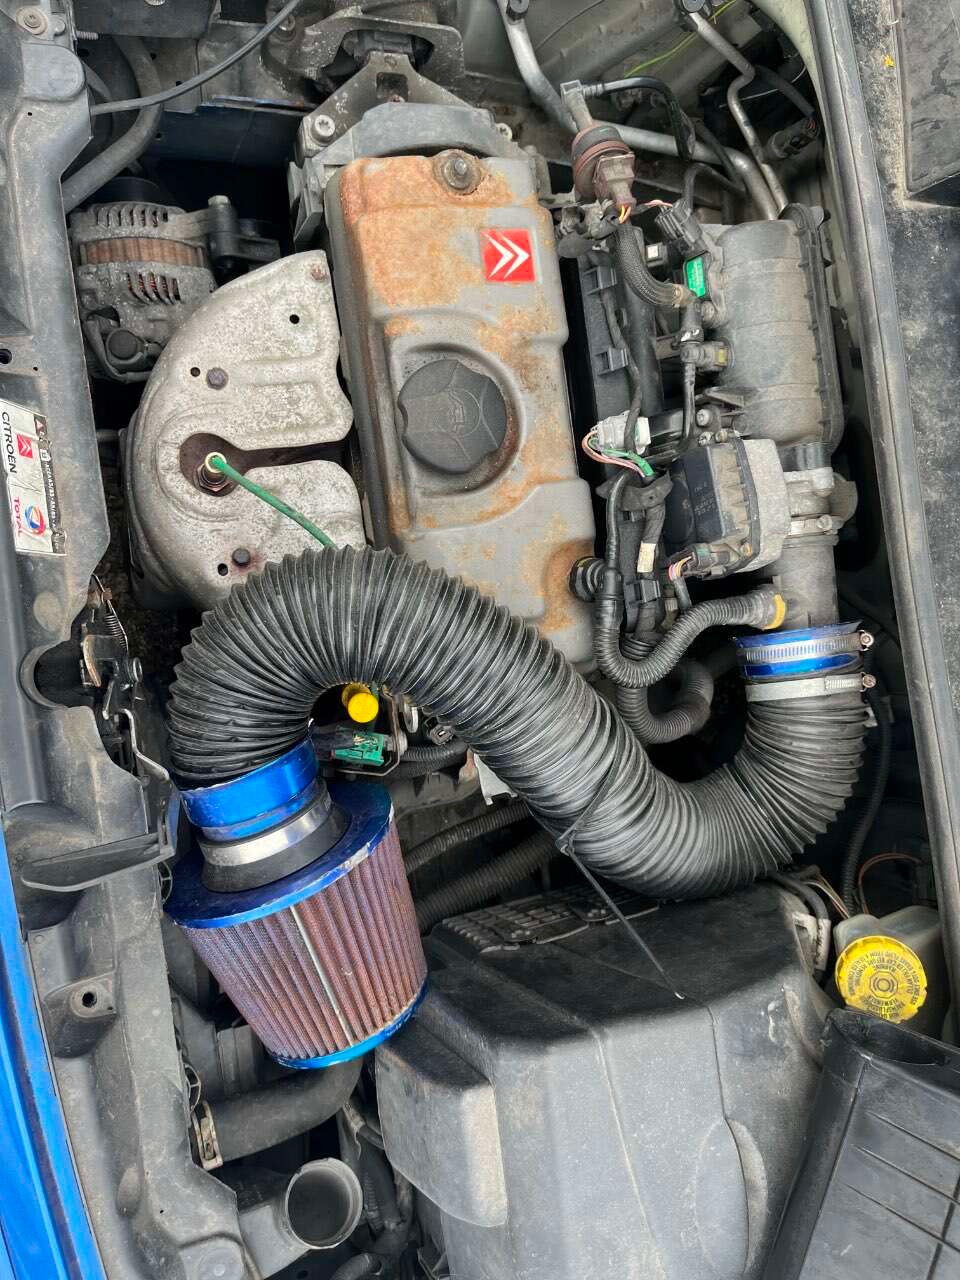 A little Citroen fitted with a stupid air filter